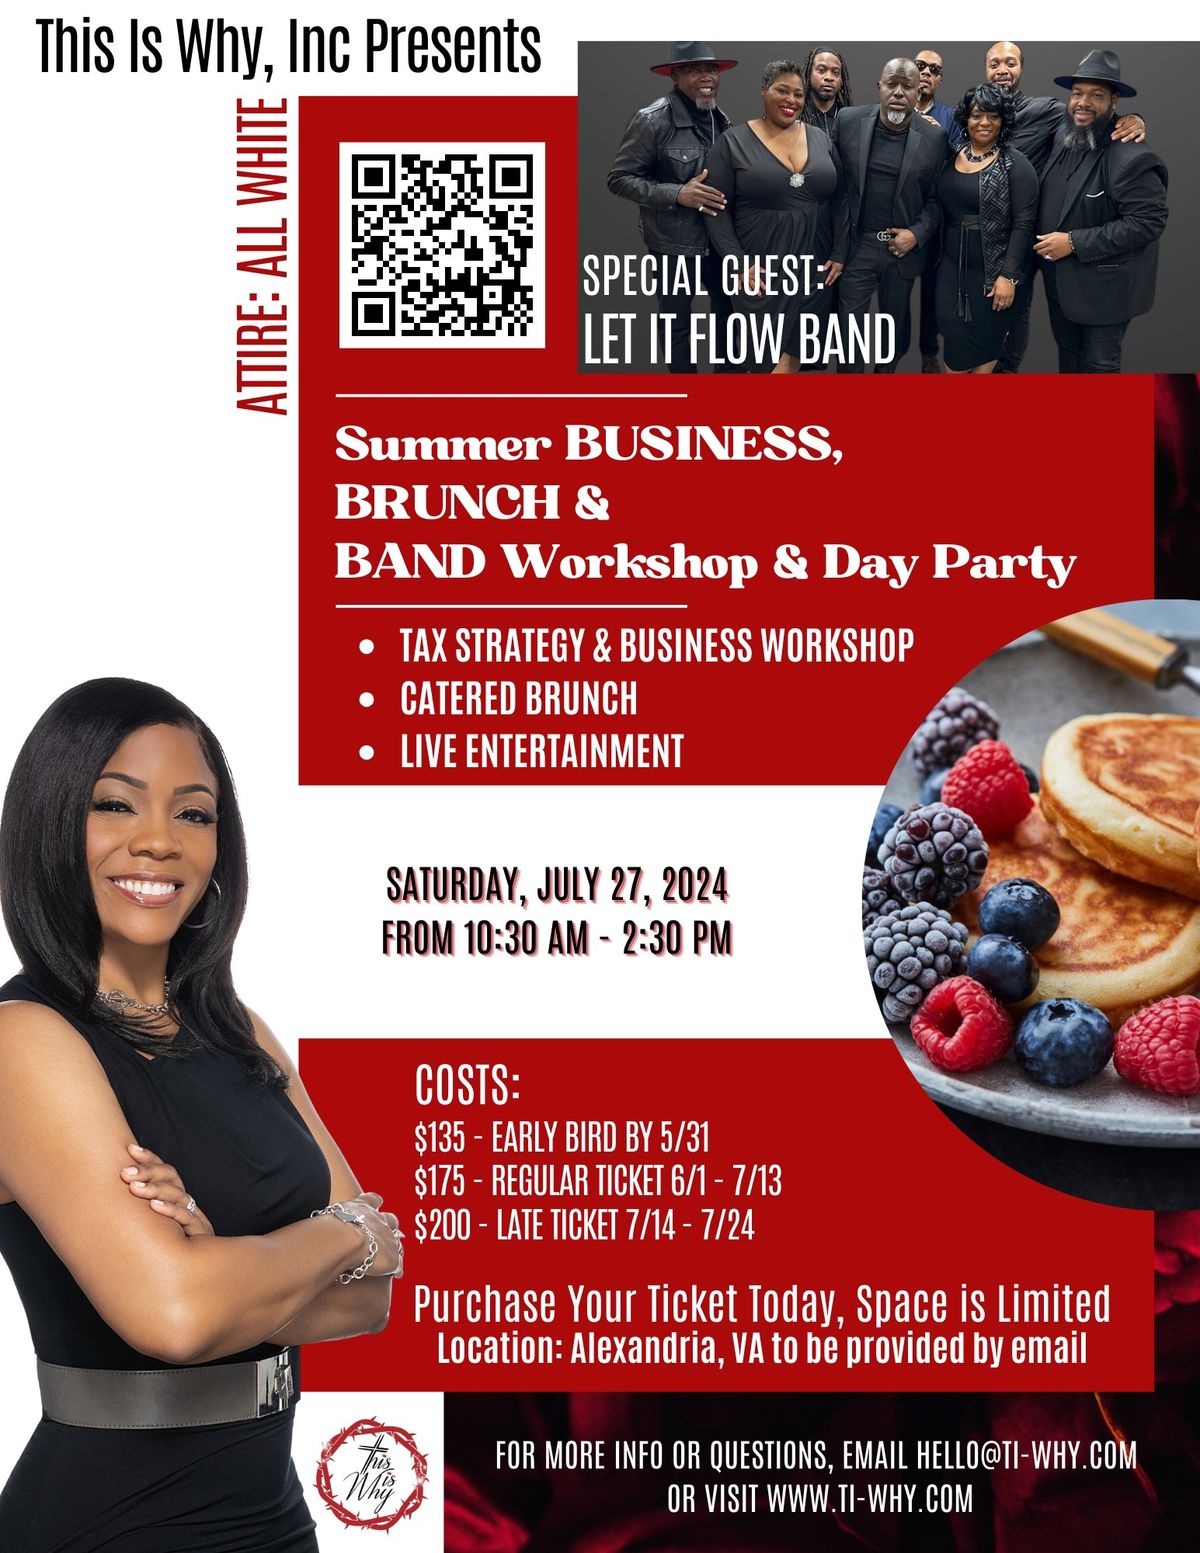 Summer Business, Brunch & Band All White Day Party w\/Special Guest Let It Flow Band!